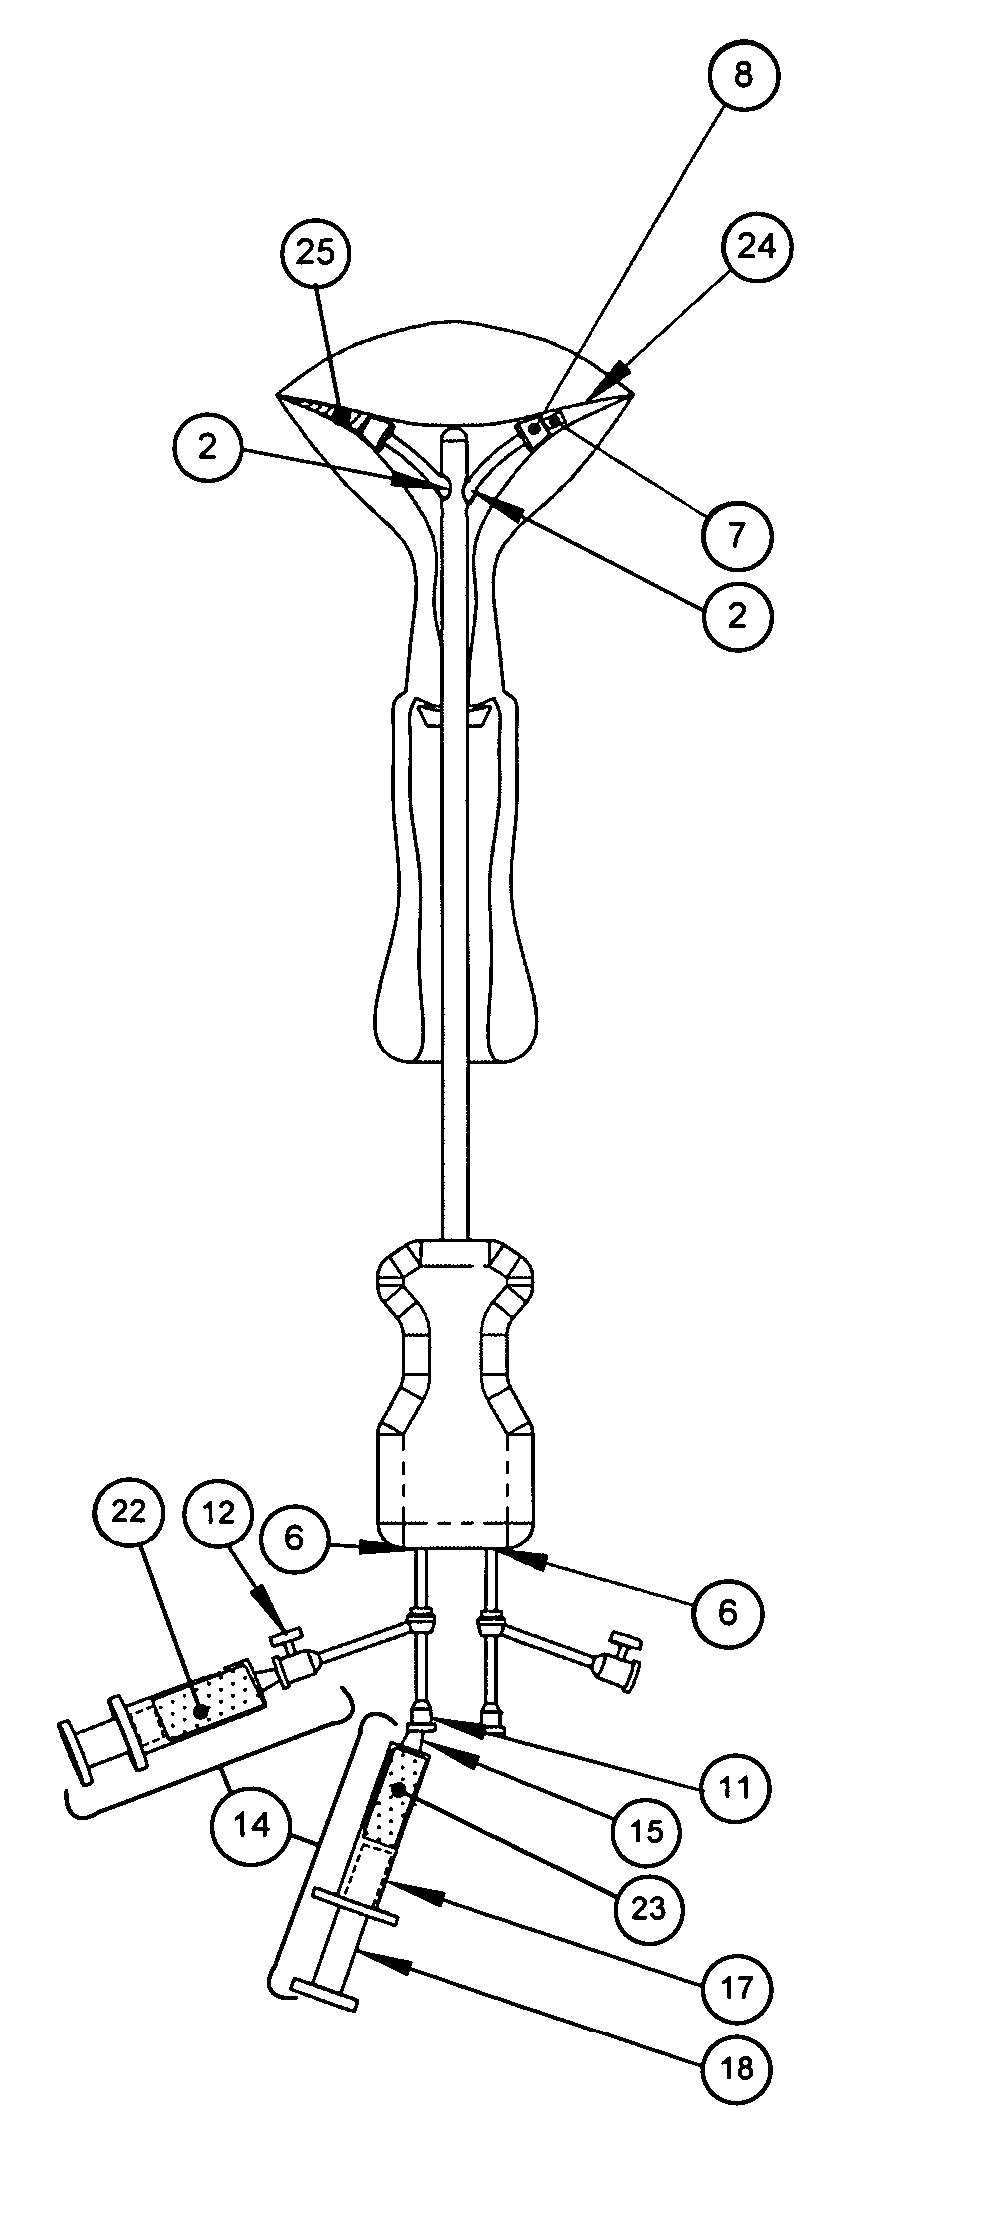 Methods and devices for conduit occlusion